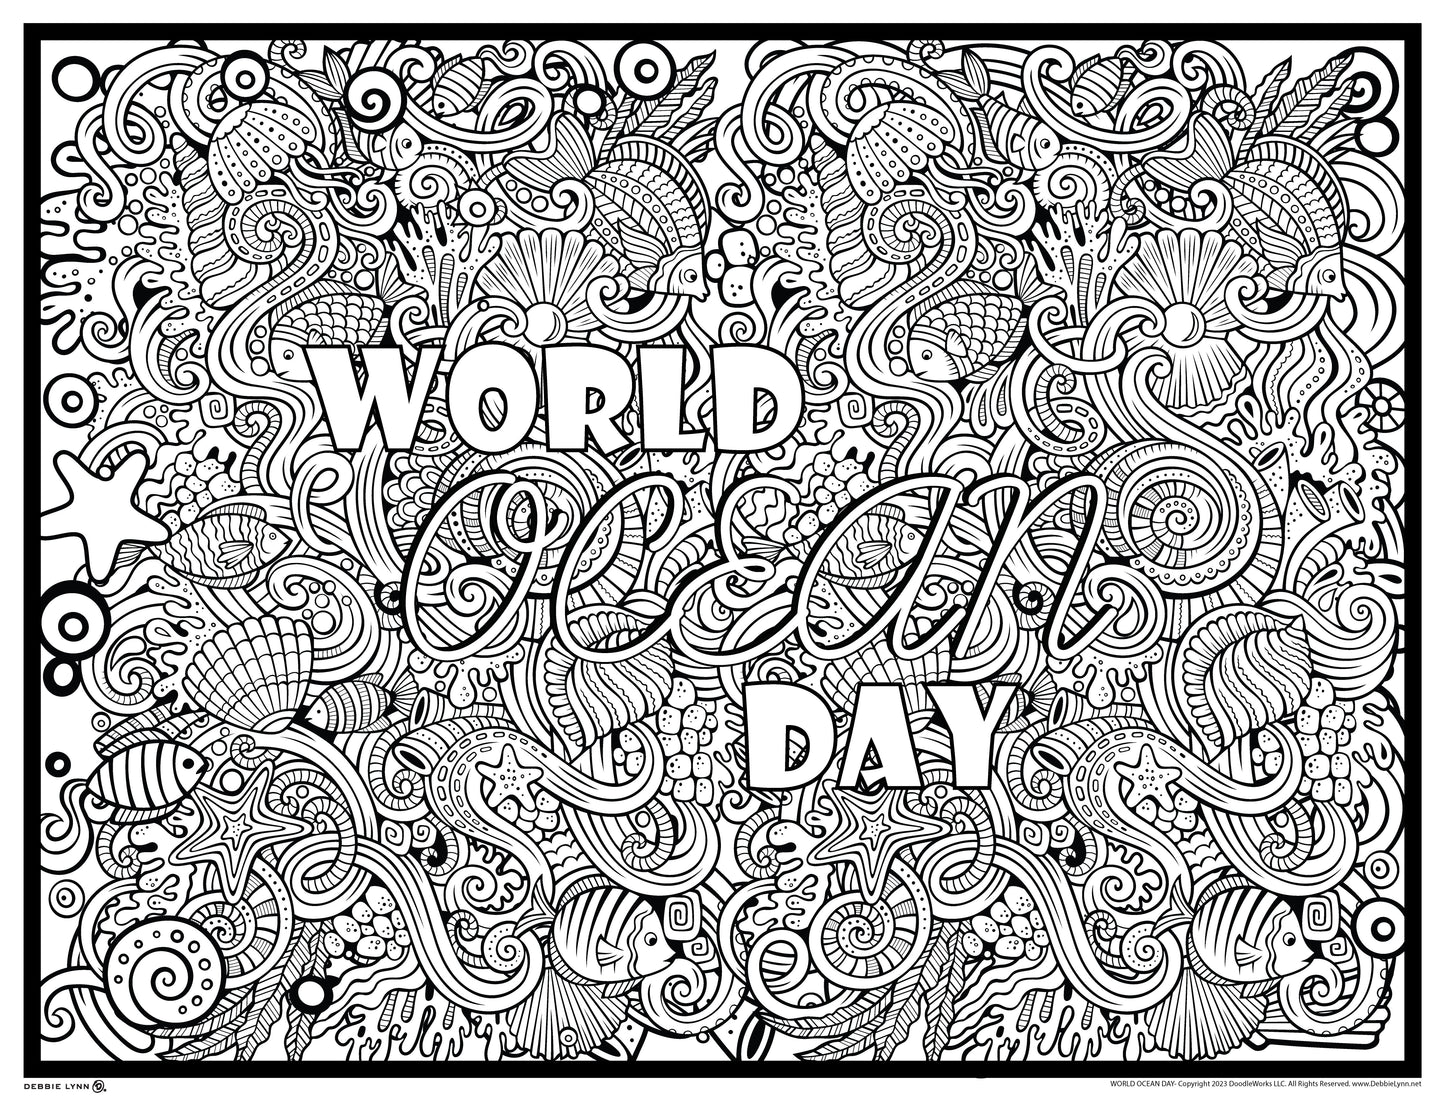 World Ocean Day Giant Coloring Poster